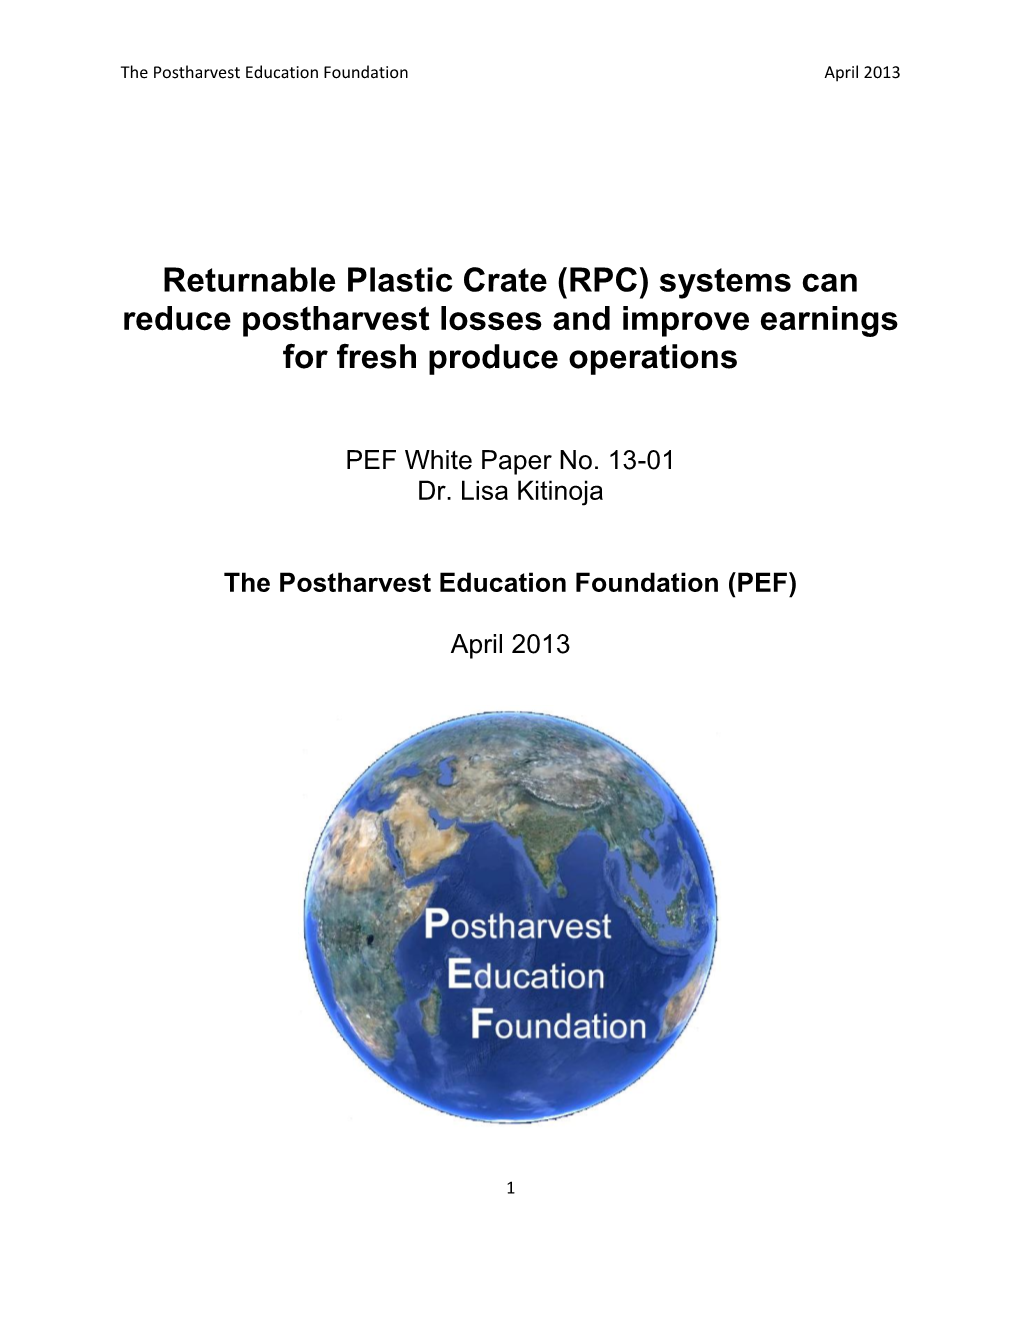 Returnable Plastic Crate (RPC) Systems Can Reduce Postharvest Losses and Improve Earnings for Fresh Produce Operations